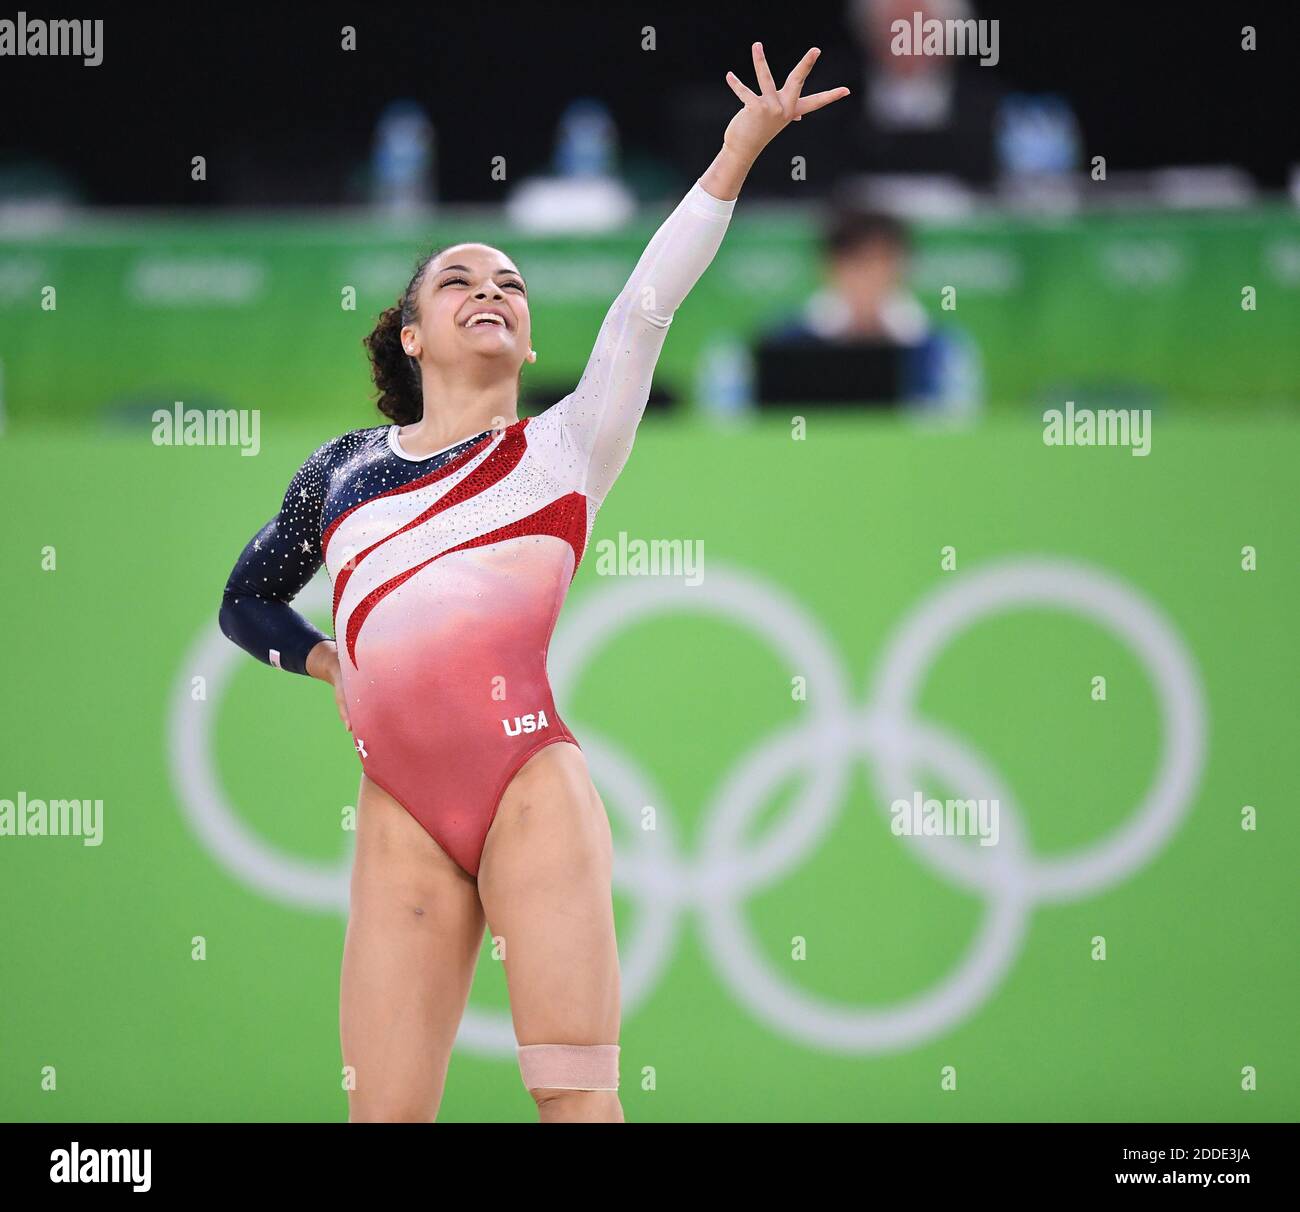 NO FILM, NO VIDEO, NO TV, NO DOCUMENTARY - U.S. gymnast Lauren Hernandez competes in the floor exercise on Tuesday, August 9, 2016, at the Rio Olympic Games in Rio De Janeiro, Brazil. The U.S. women's squad captured the gold medal in the team competition. Photo by Mark Reis/Colorado Springs Gazette/TNS/ABACAPRESS.COM Stock Photo